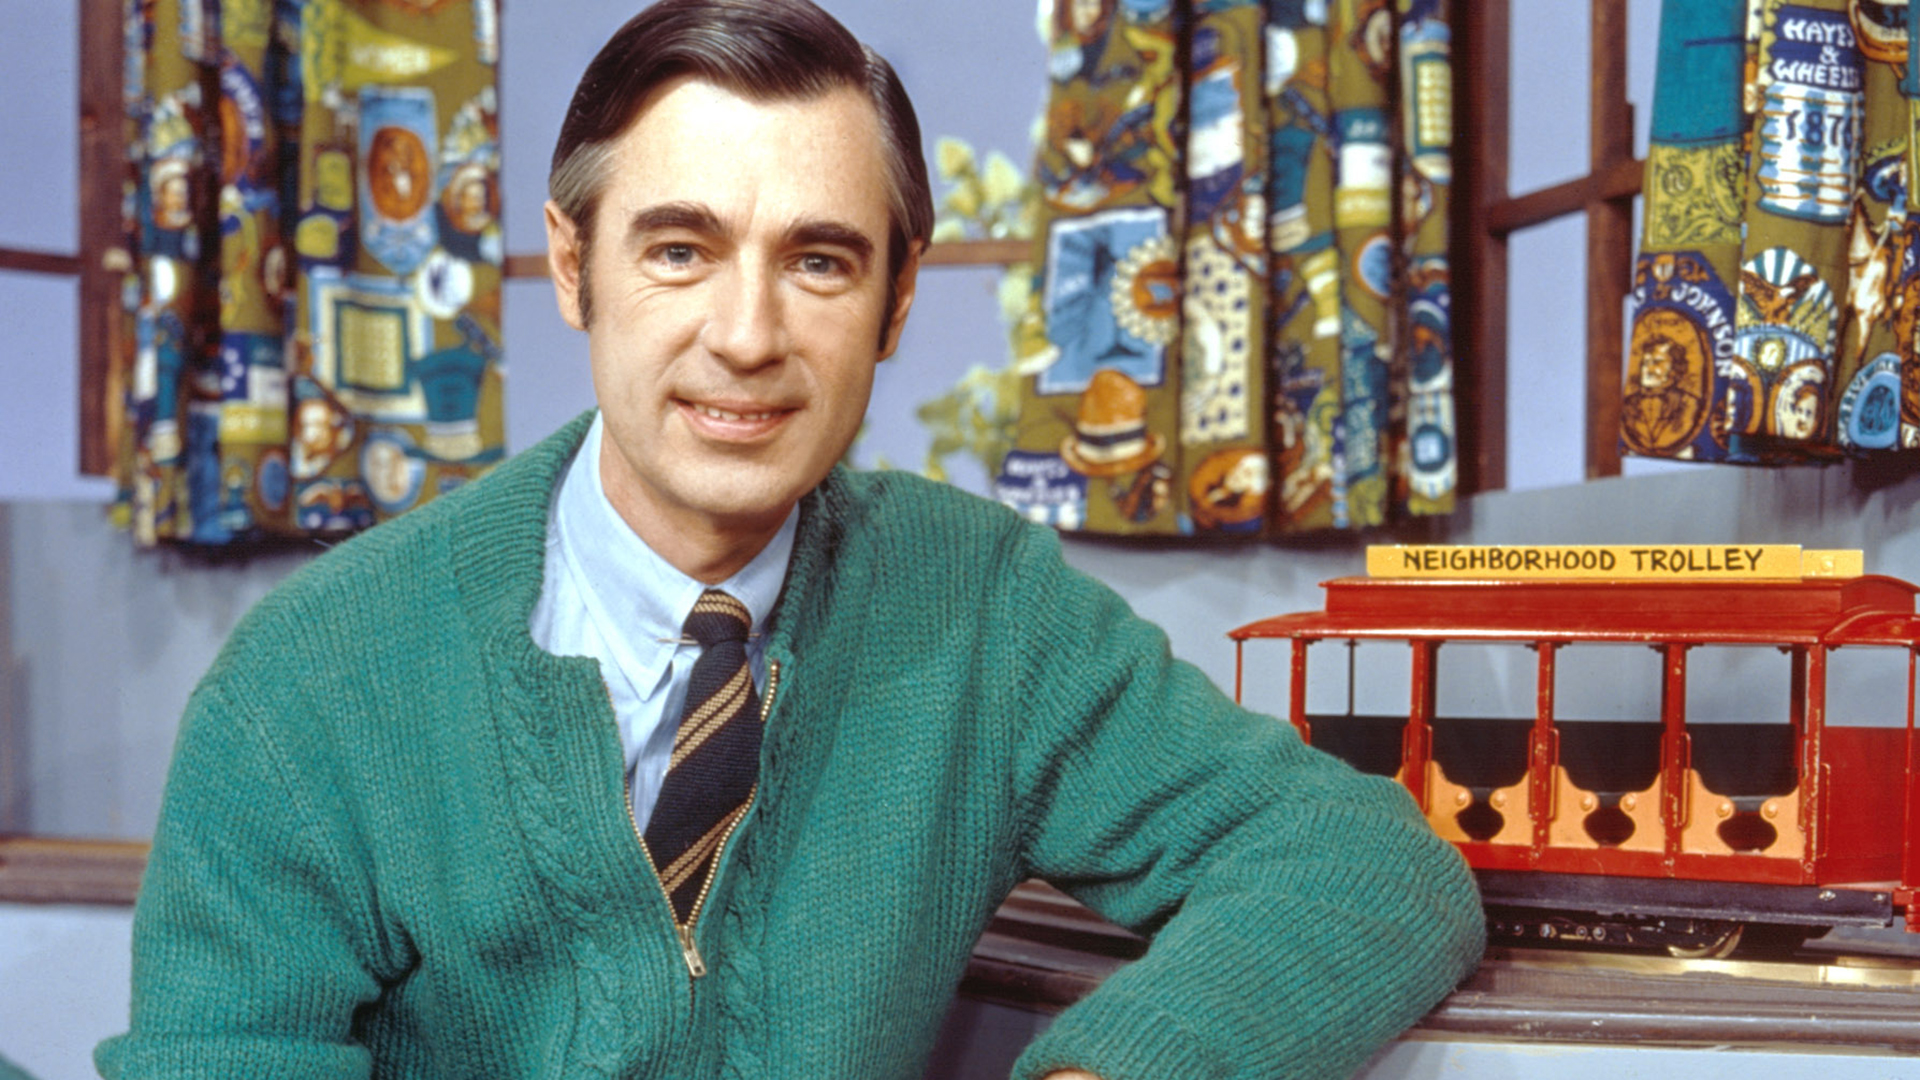 Here's a first look at the new 'Mister Rogers' documentary